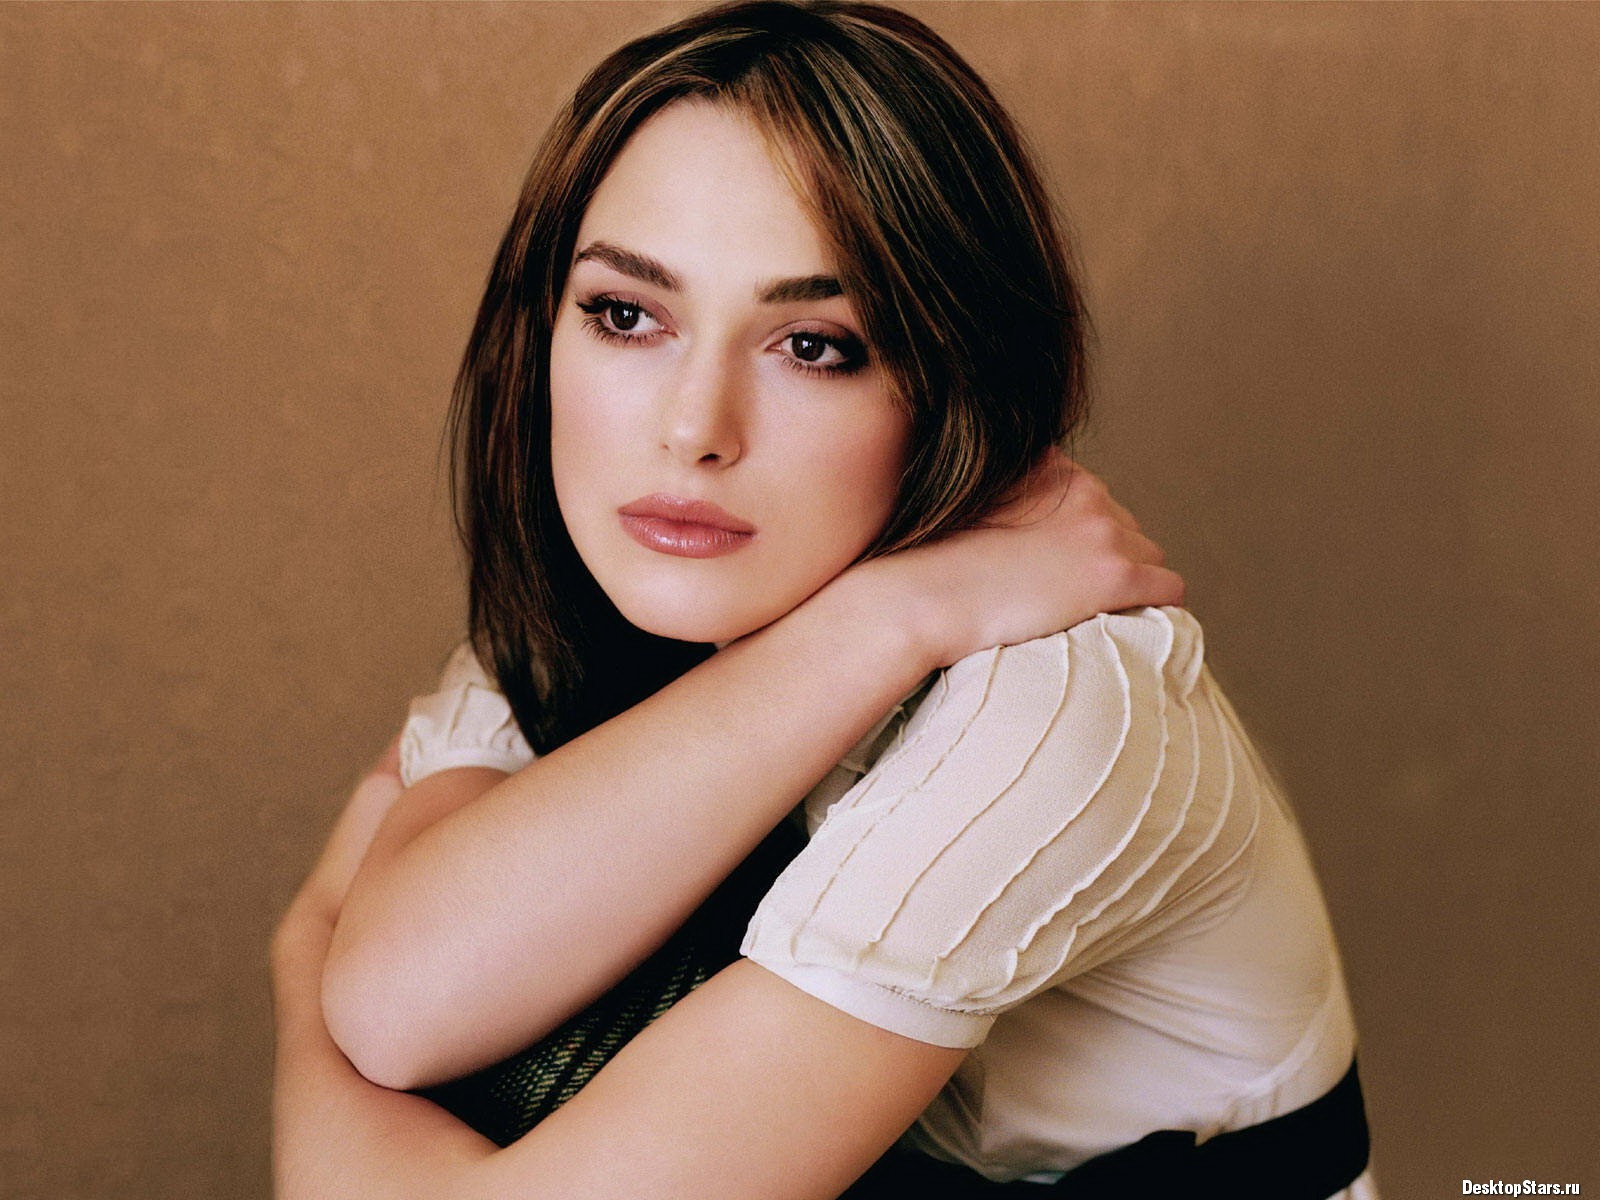 Keira Knightley #050 - 1600x1200 Wallpapers Pictures Photos Images